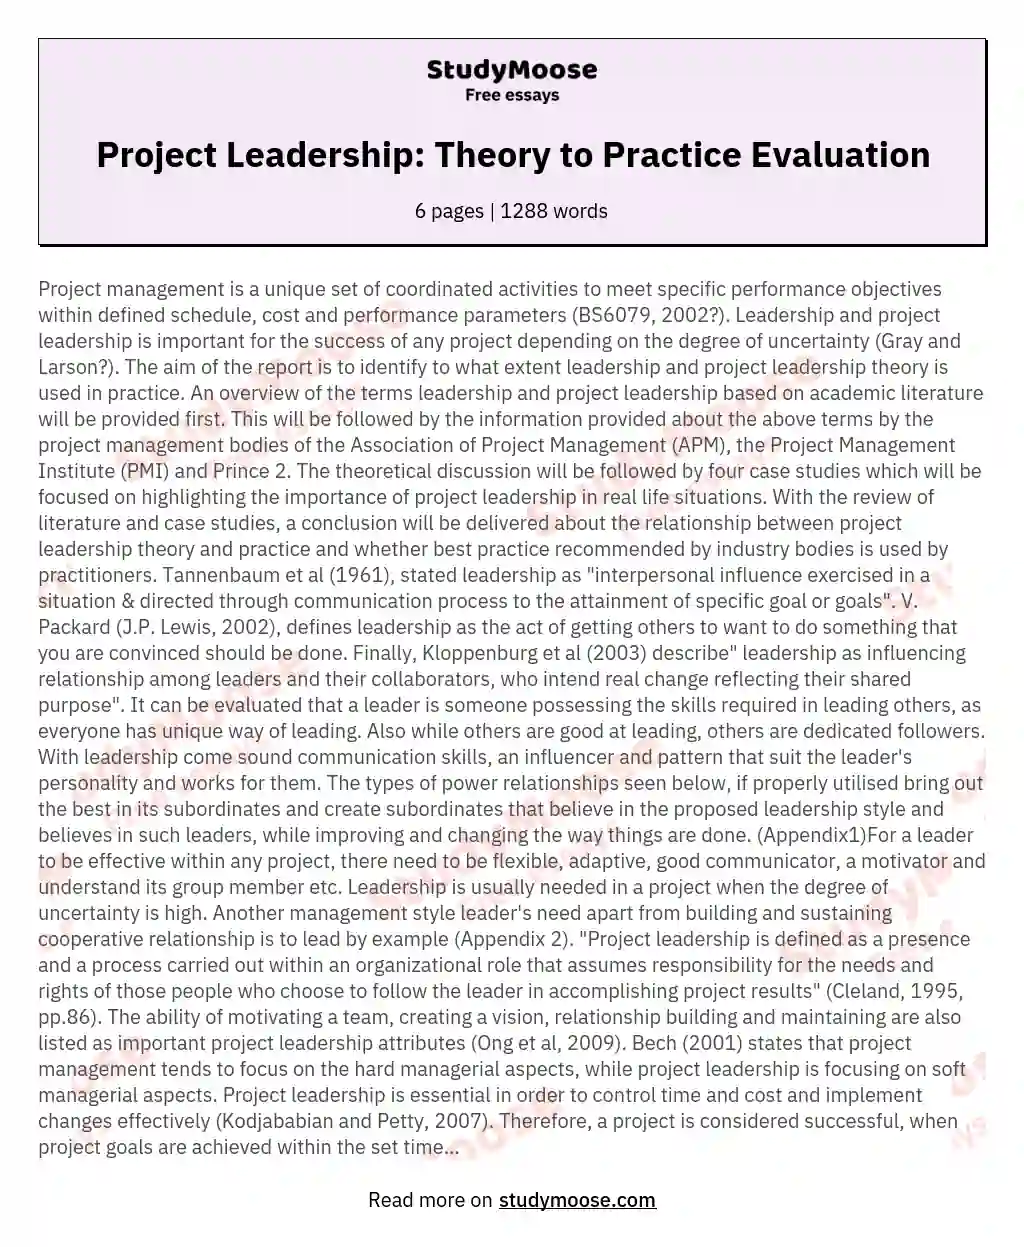 Project Leadership: Theory to Practice Evaluation essay